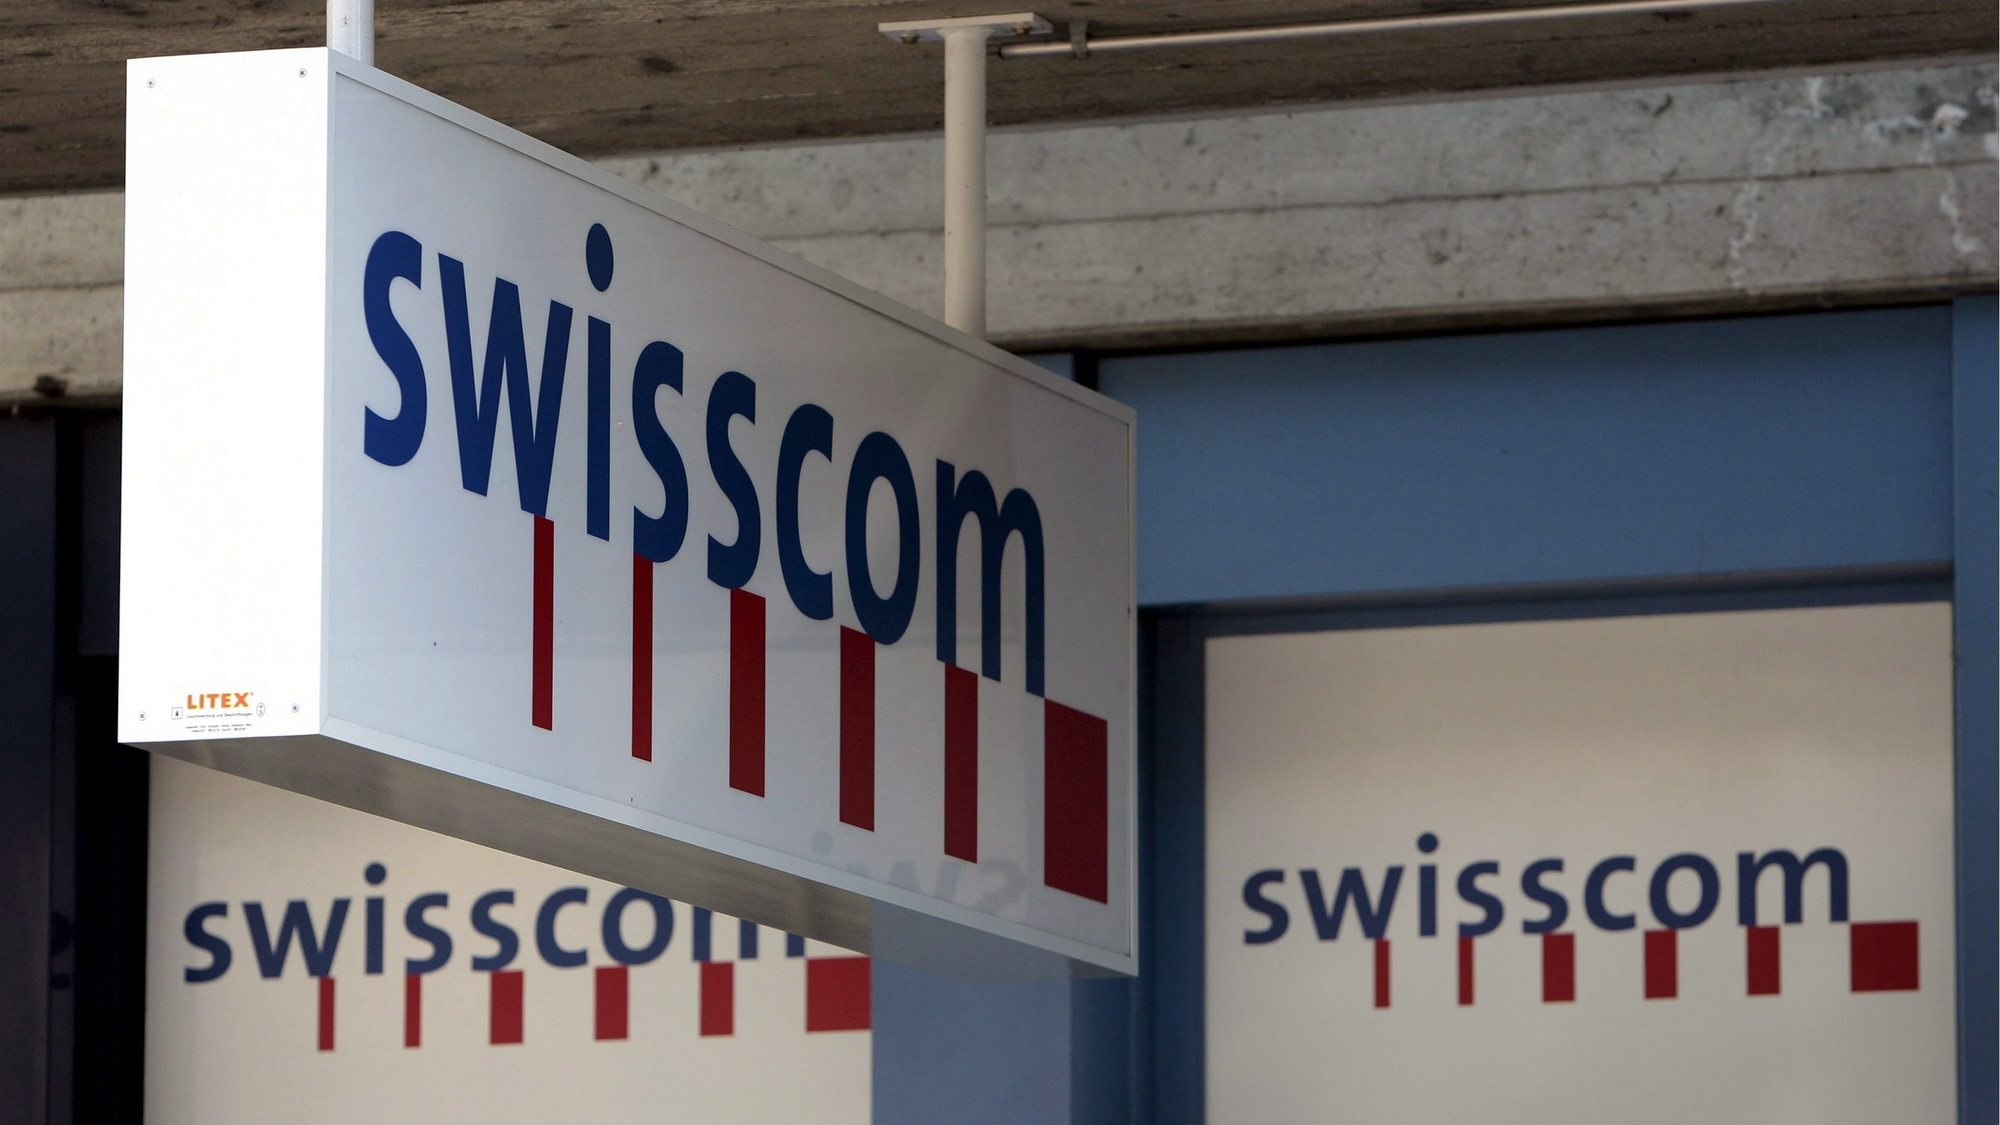 epa00954117 (FILES) Picture dated 16 February 2007 shows Swisscom logos at the company&#039;s branch in Buchs, Switzerland. Swisscom AG, Switzerland&#039;s largest telephone company, announced Monday, 12 March 2007, that it will offer to buy Italy&#039;s FastWeb SpA for 3.7 billion euros in cash to add a million broadband Internet customers. Swisscom offered 47 euros for each FastWeb share, or 12 percent more than the closing price of 42.02 euros on March 09. Swisscom plans to finance the purchase with debt and a sale of as many as 4.9 million company shares.  EPA/EDDY RISCH